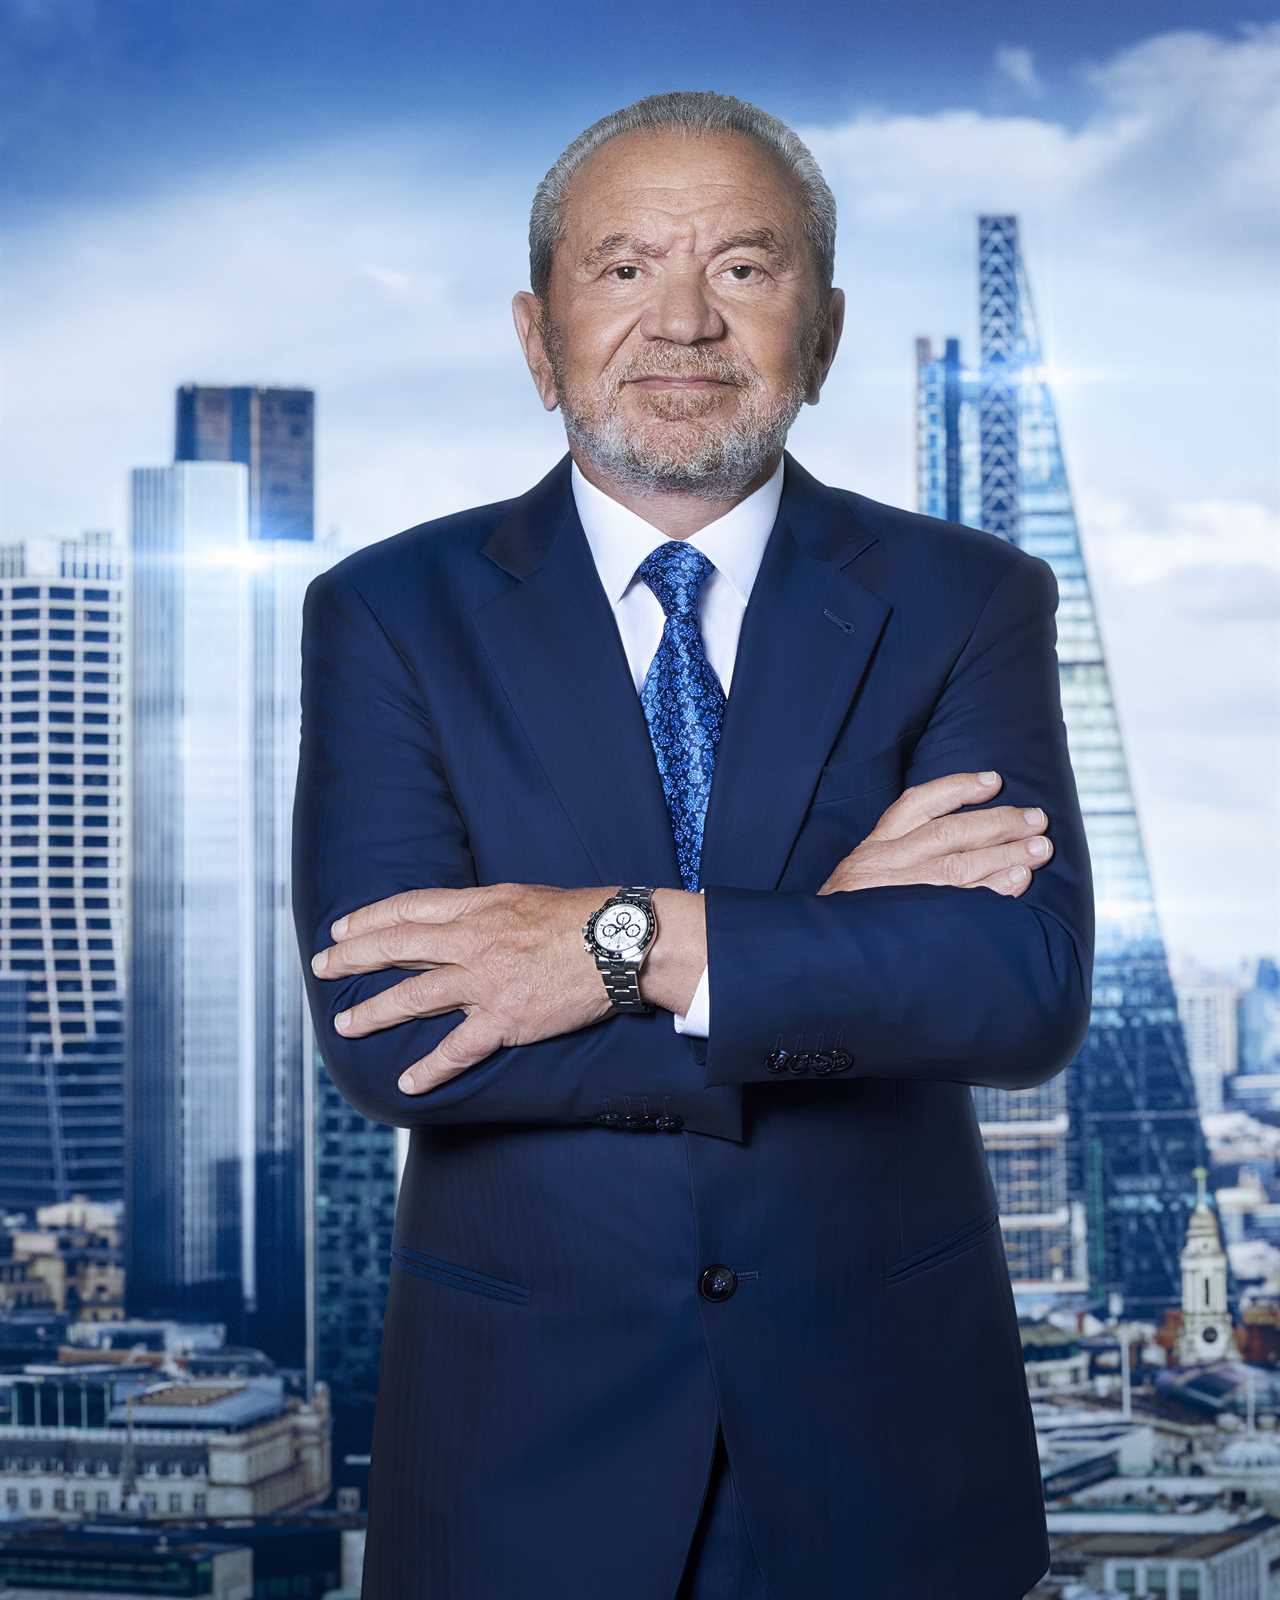 The Apprentice viewers react to controversial firing by Lord Sugar